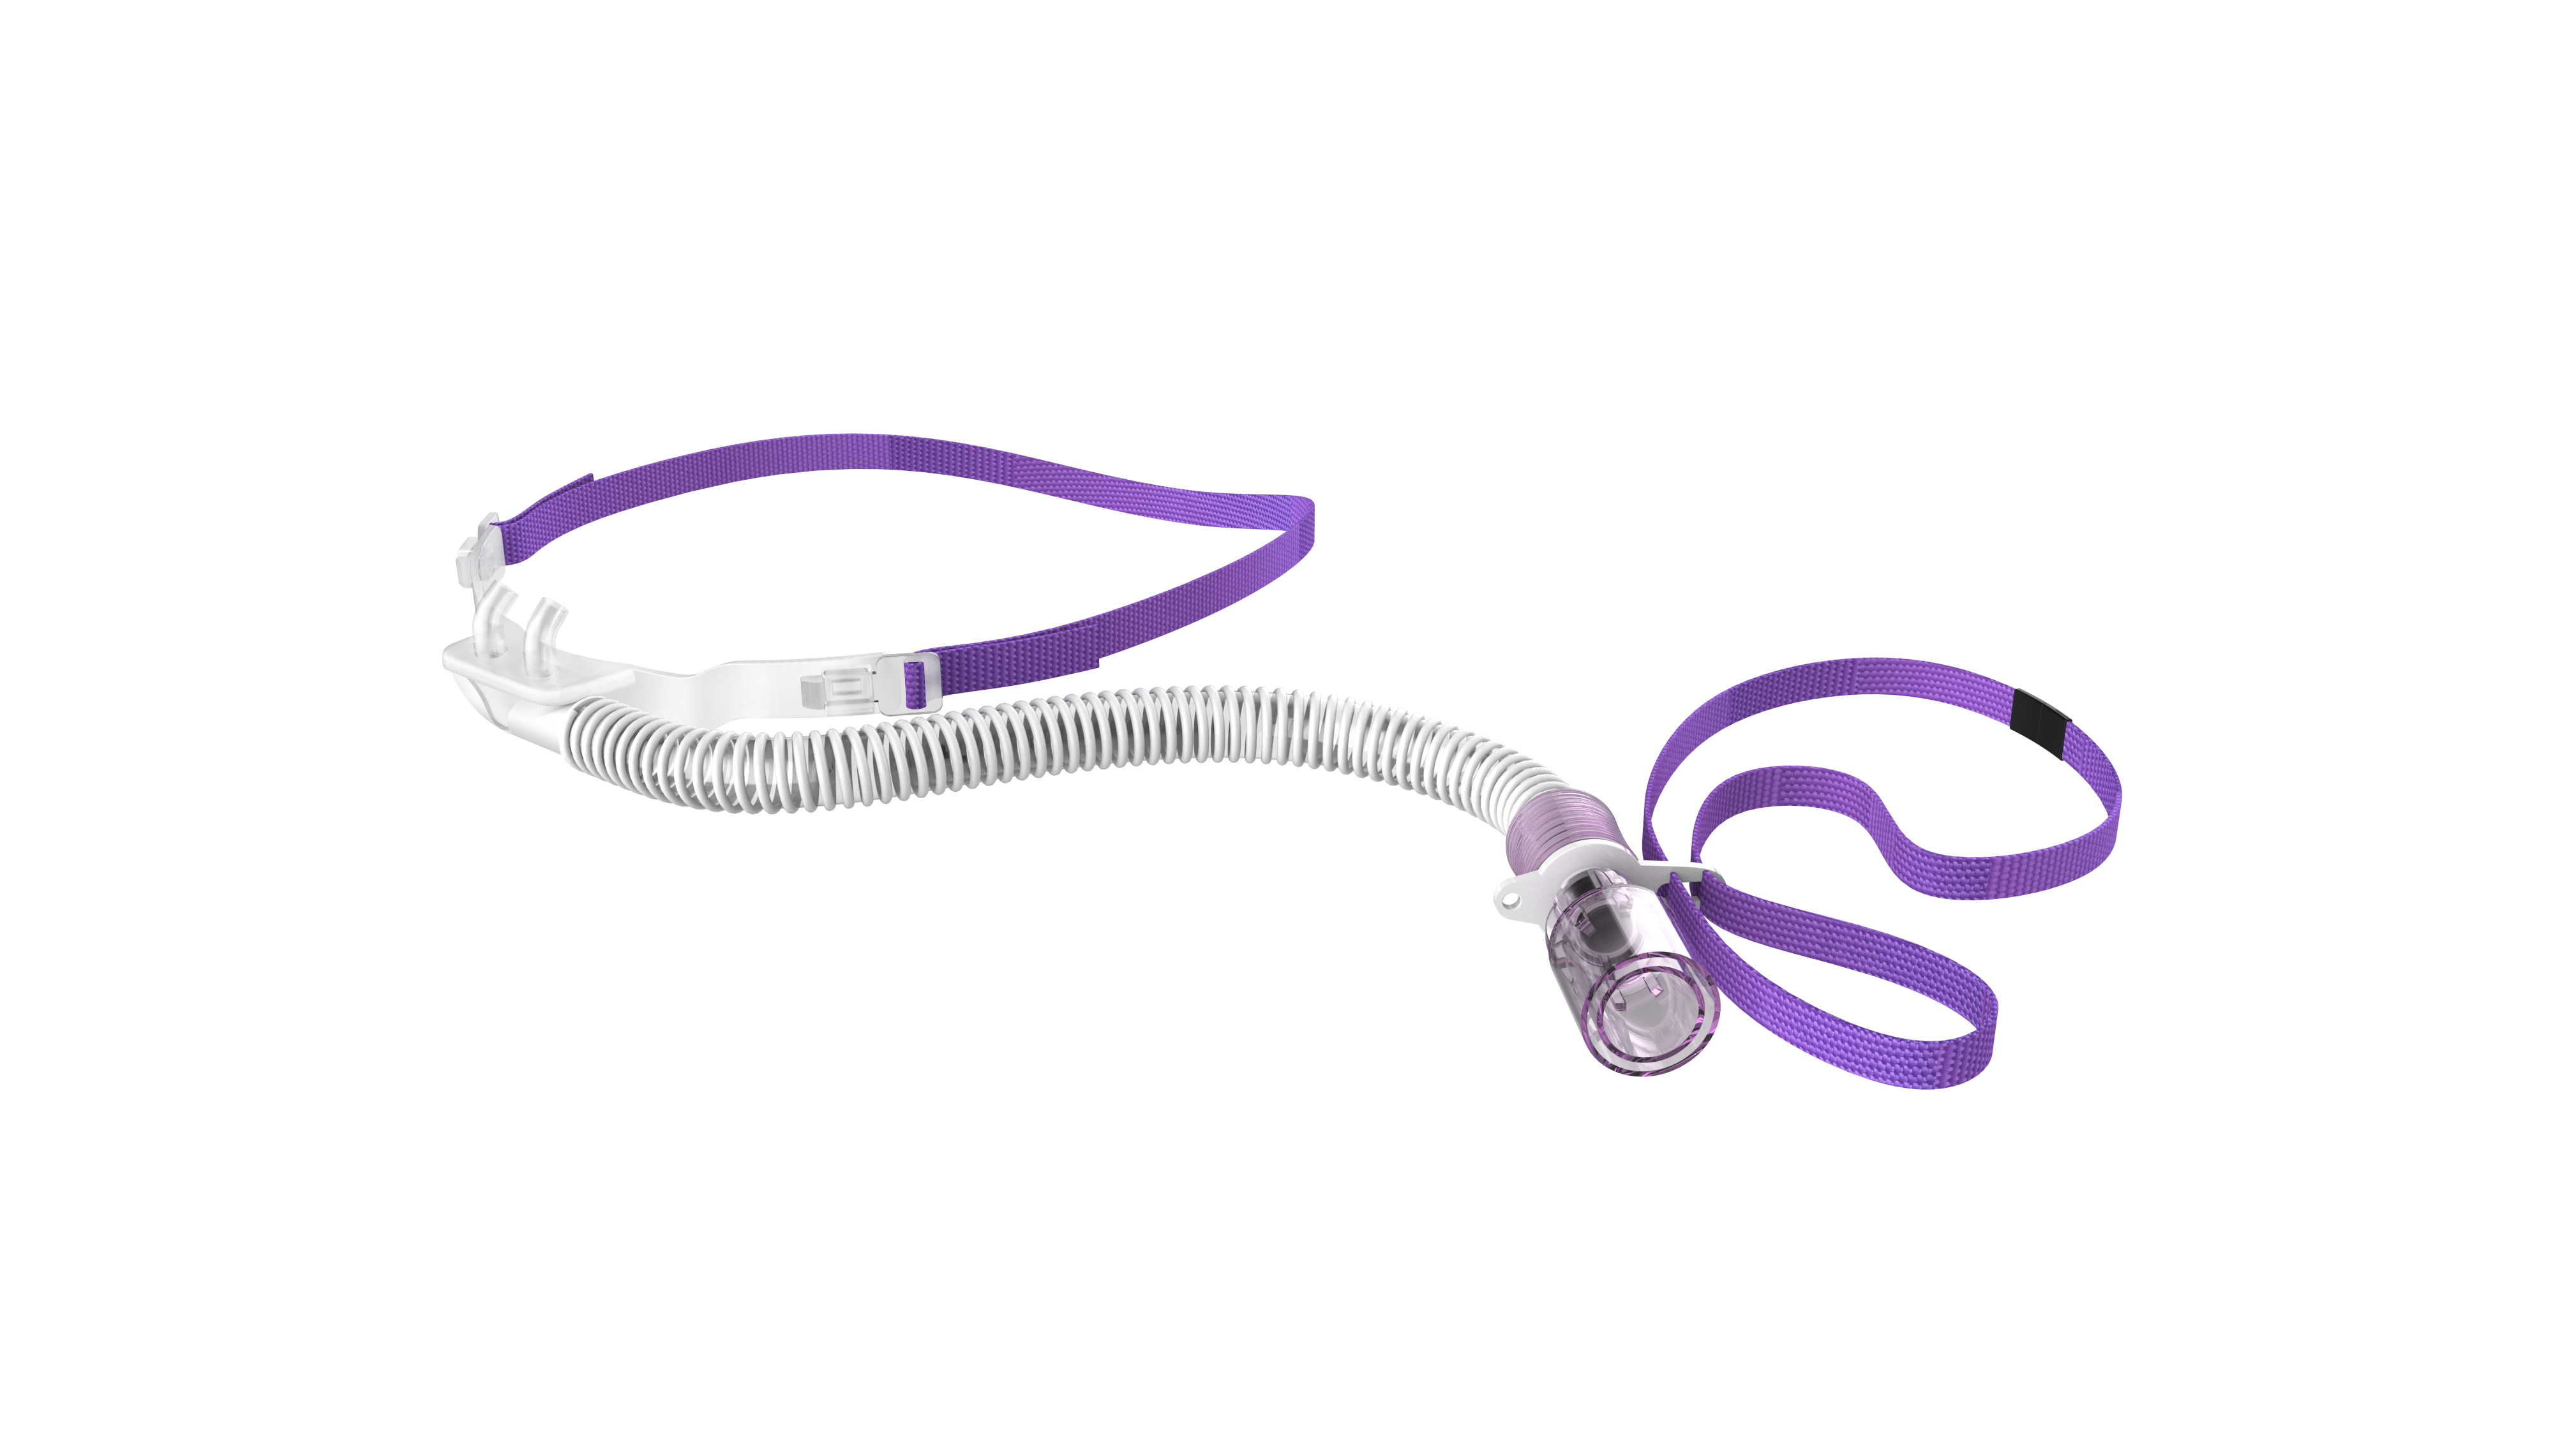 Nasal Cannula patient interface